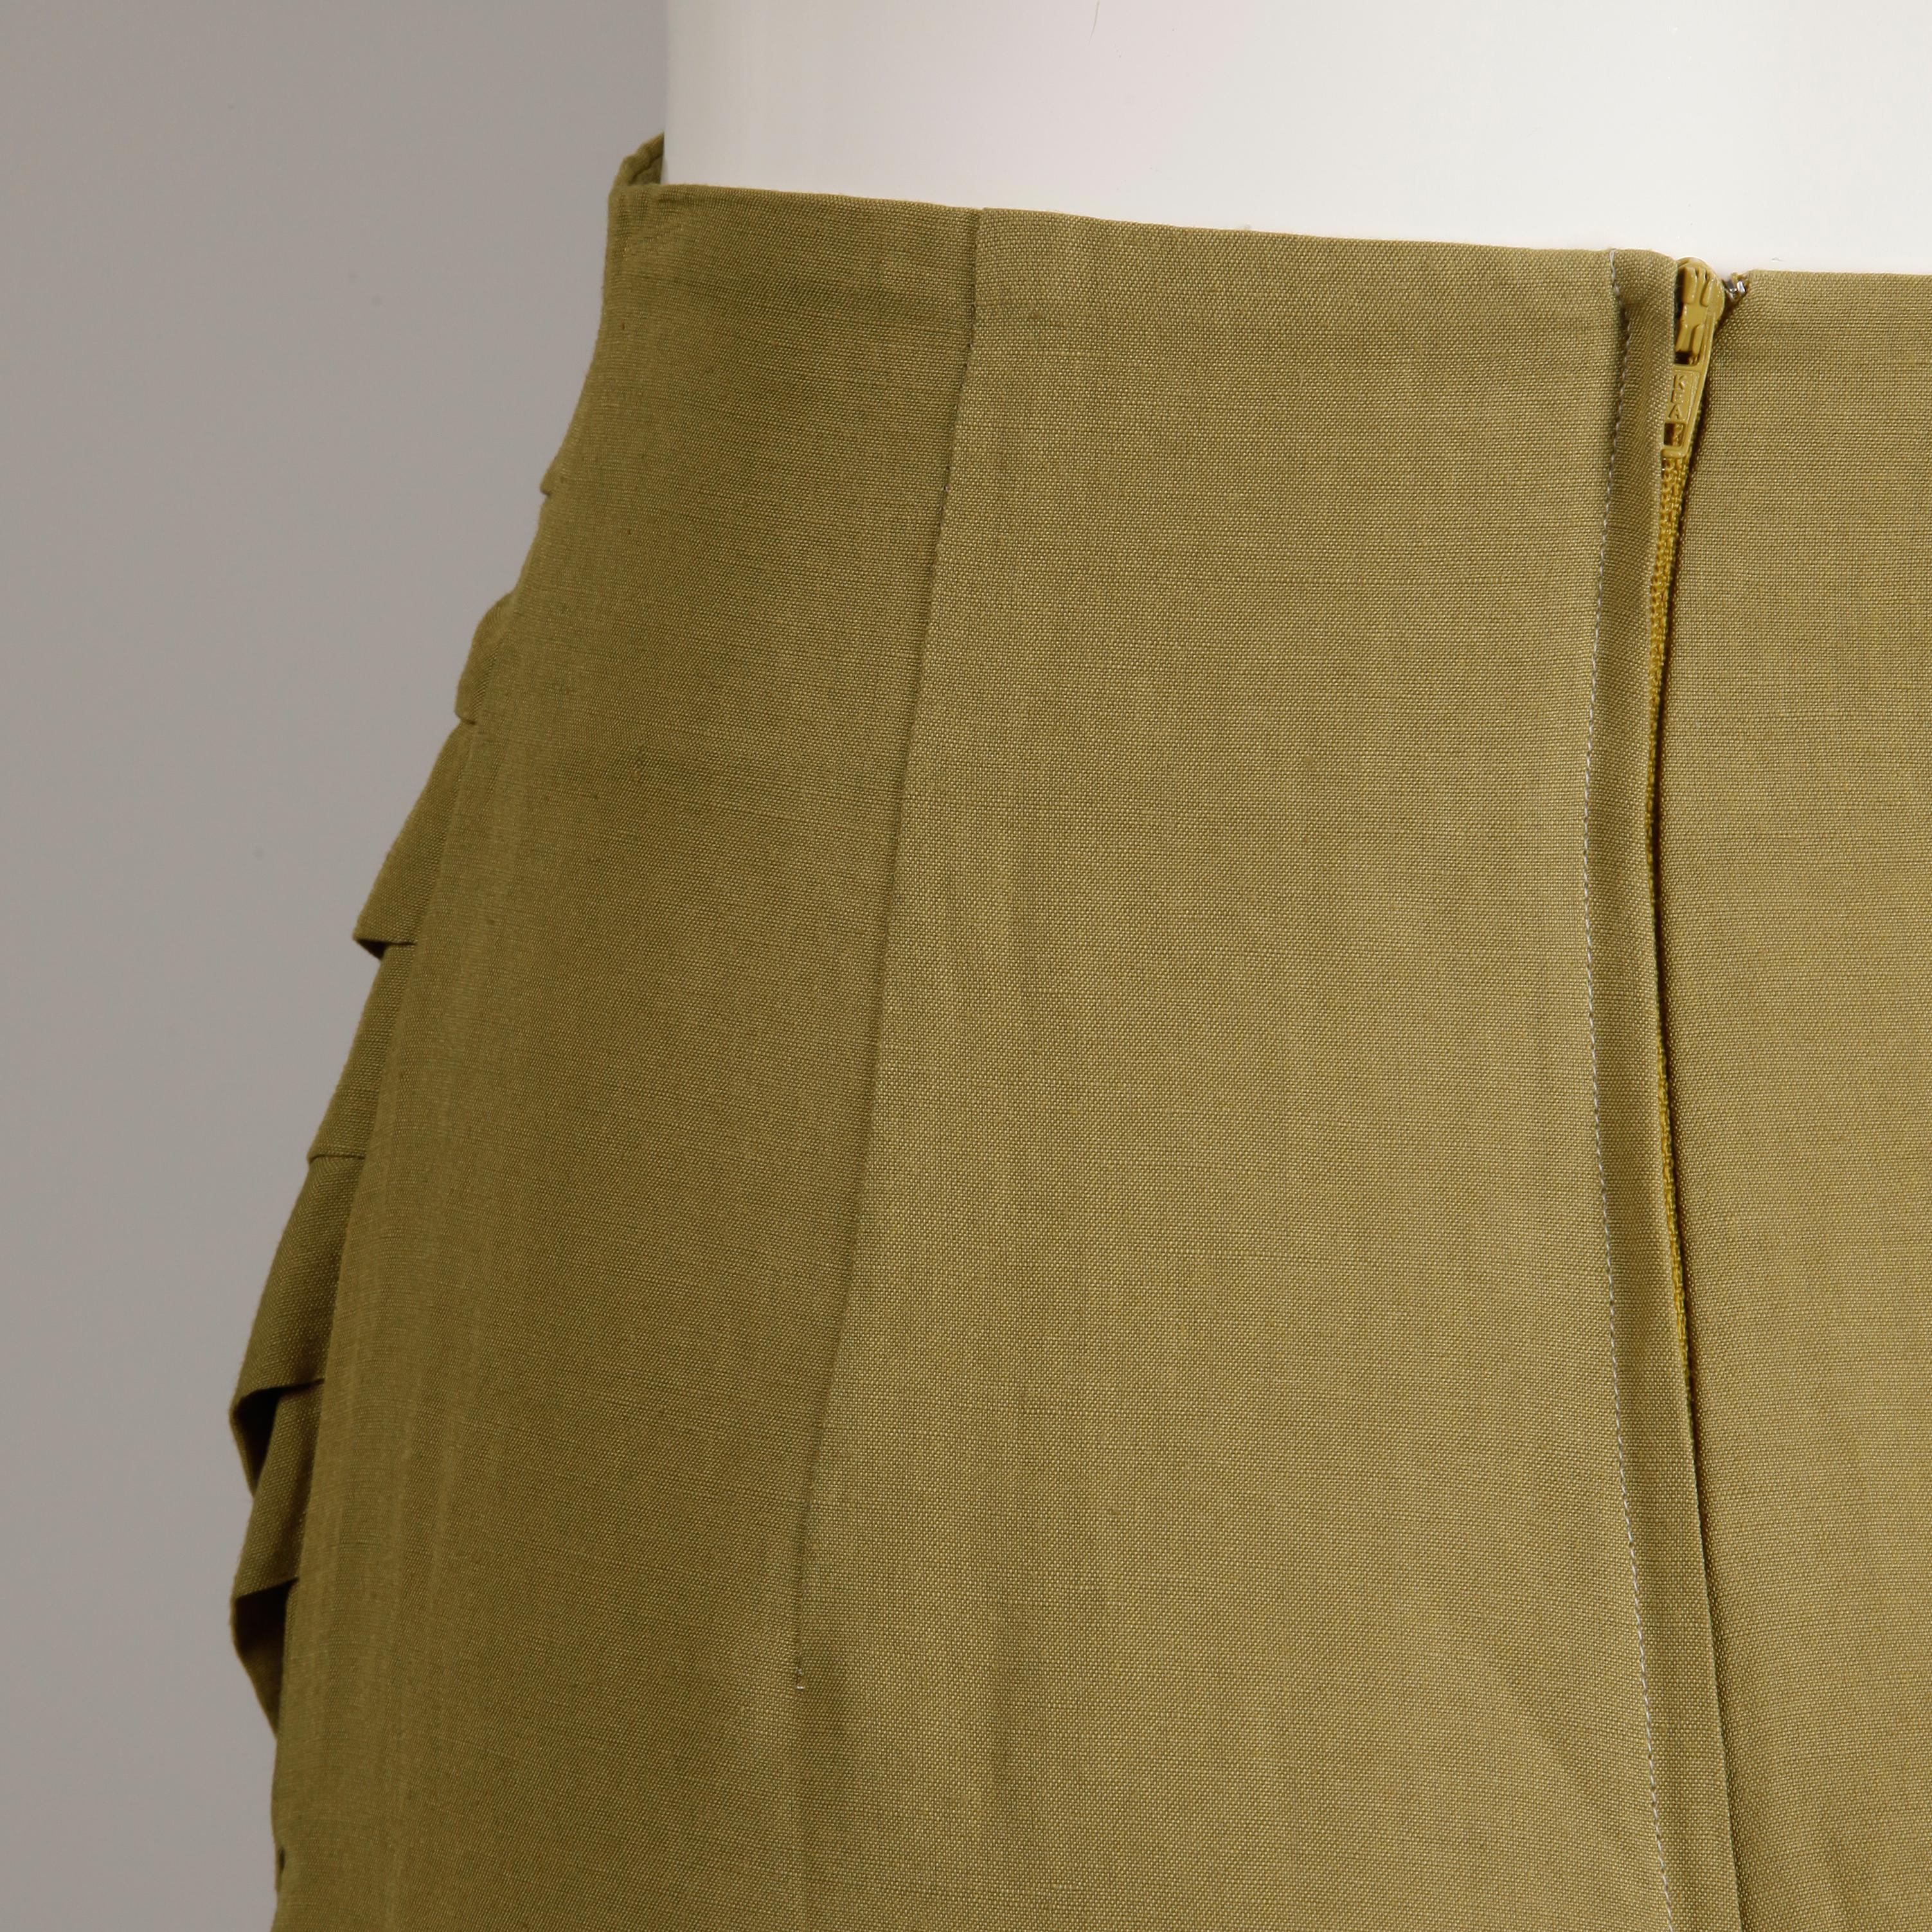 Women's 1990s Byblos Vintage Olive Green Asymmetric Ruched Stretch Linen Pencil Skirt For Sale